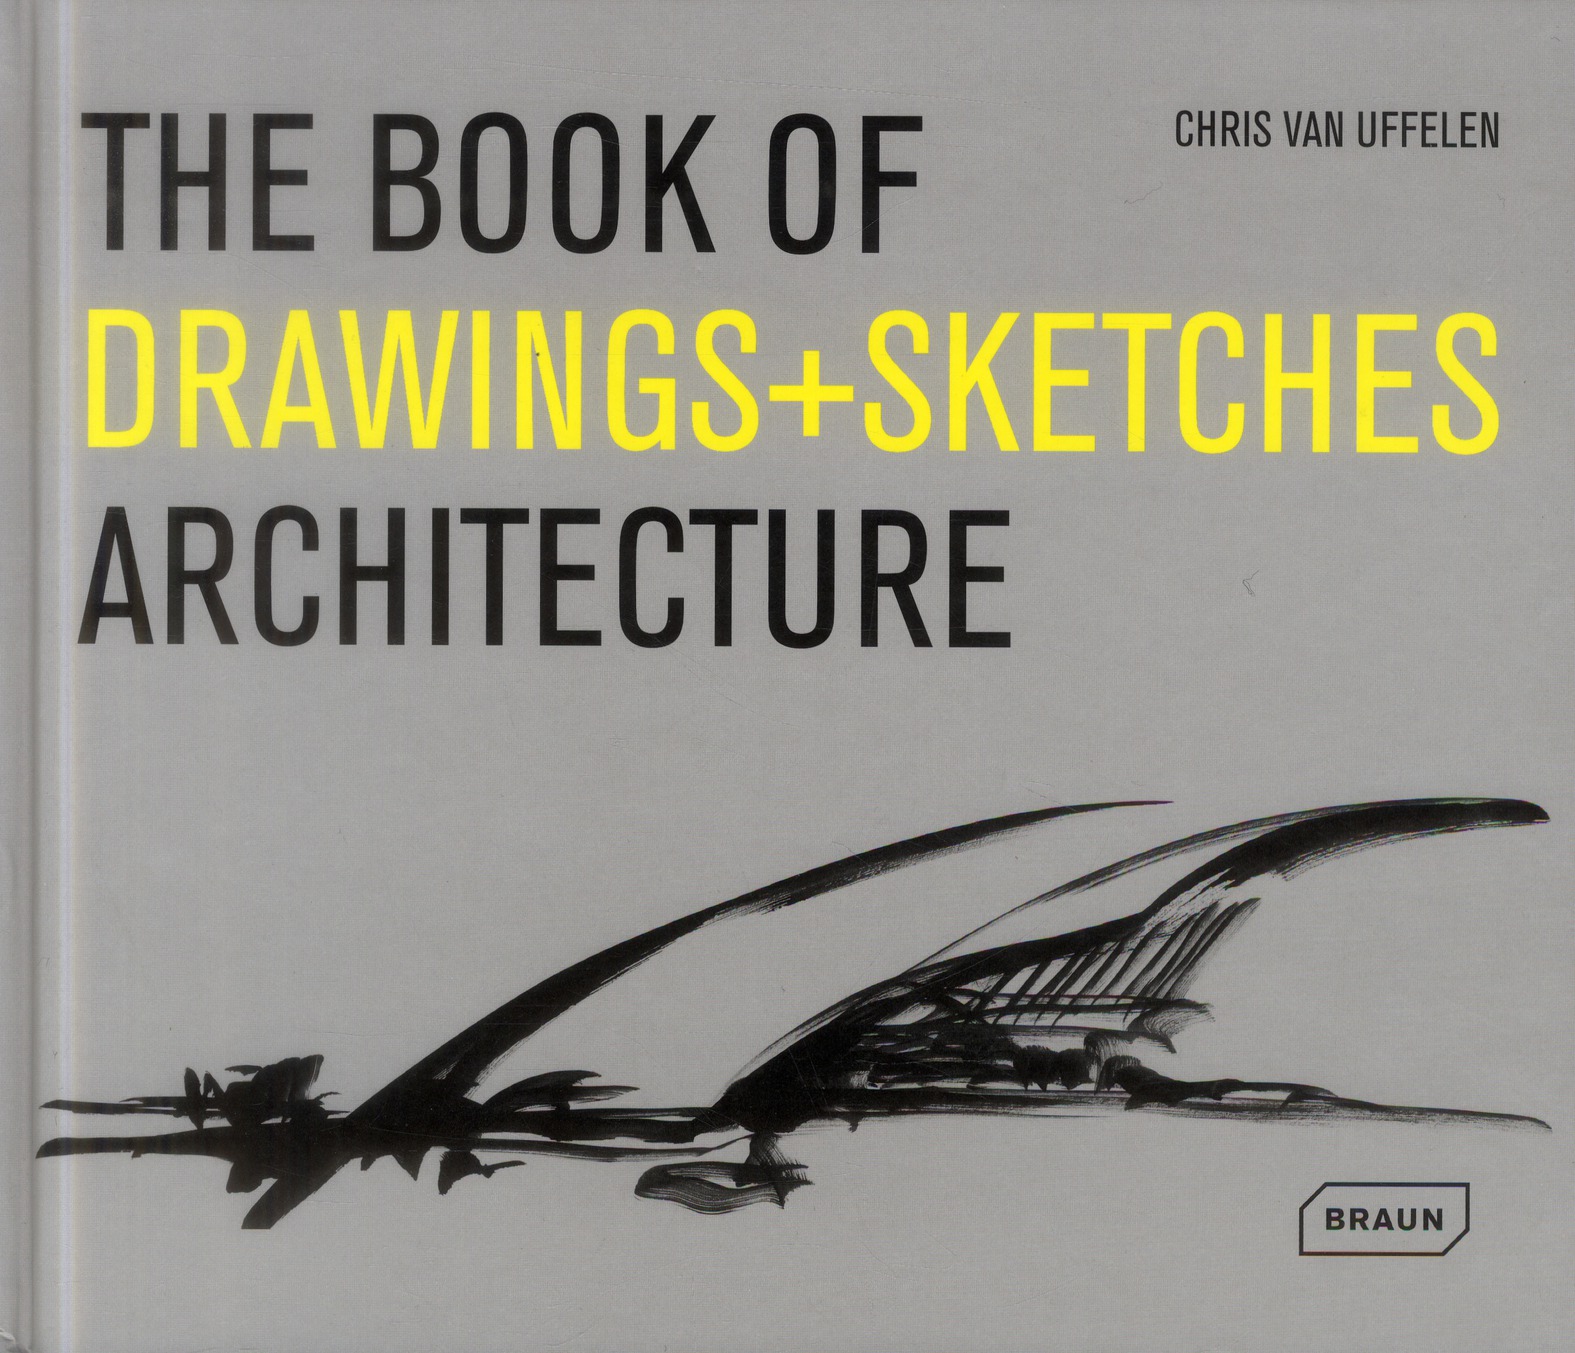 THE BOOK OF DRAWINGS + SKETCHES ARCHITECTURE